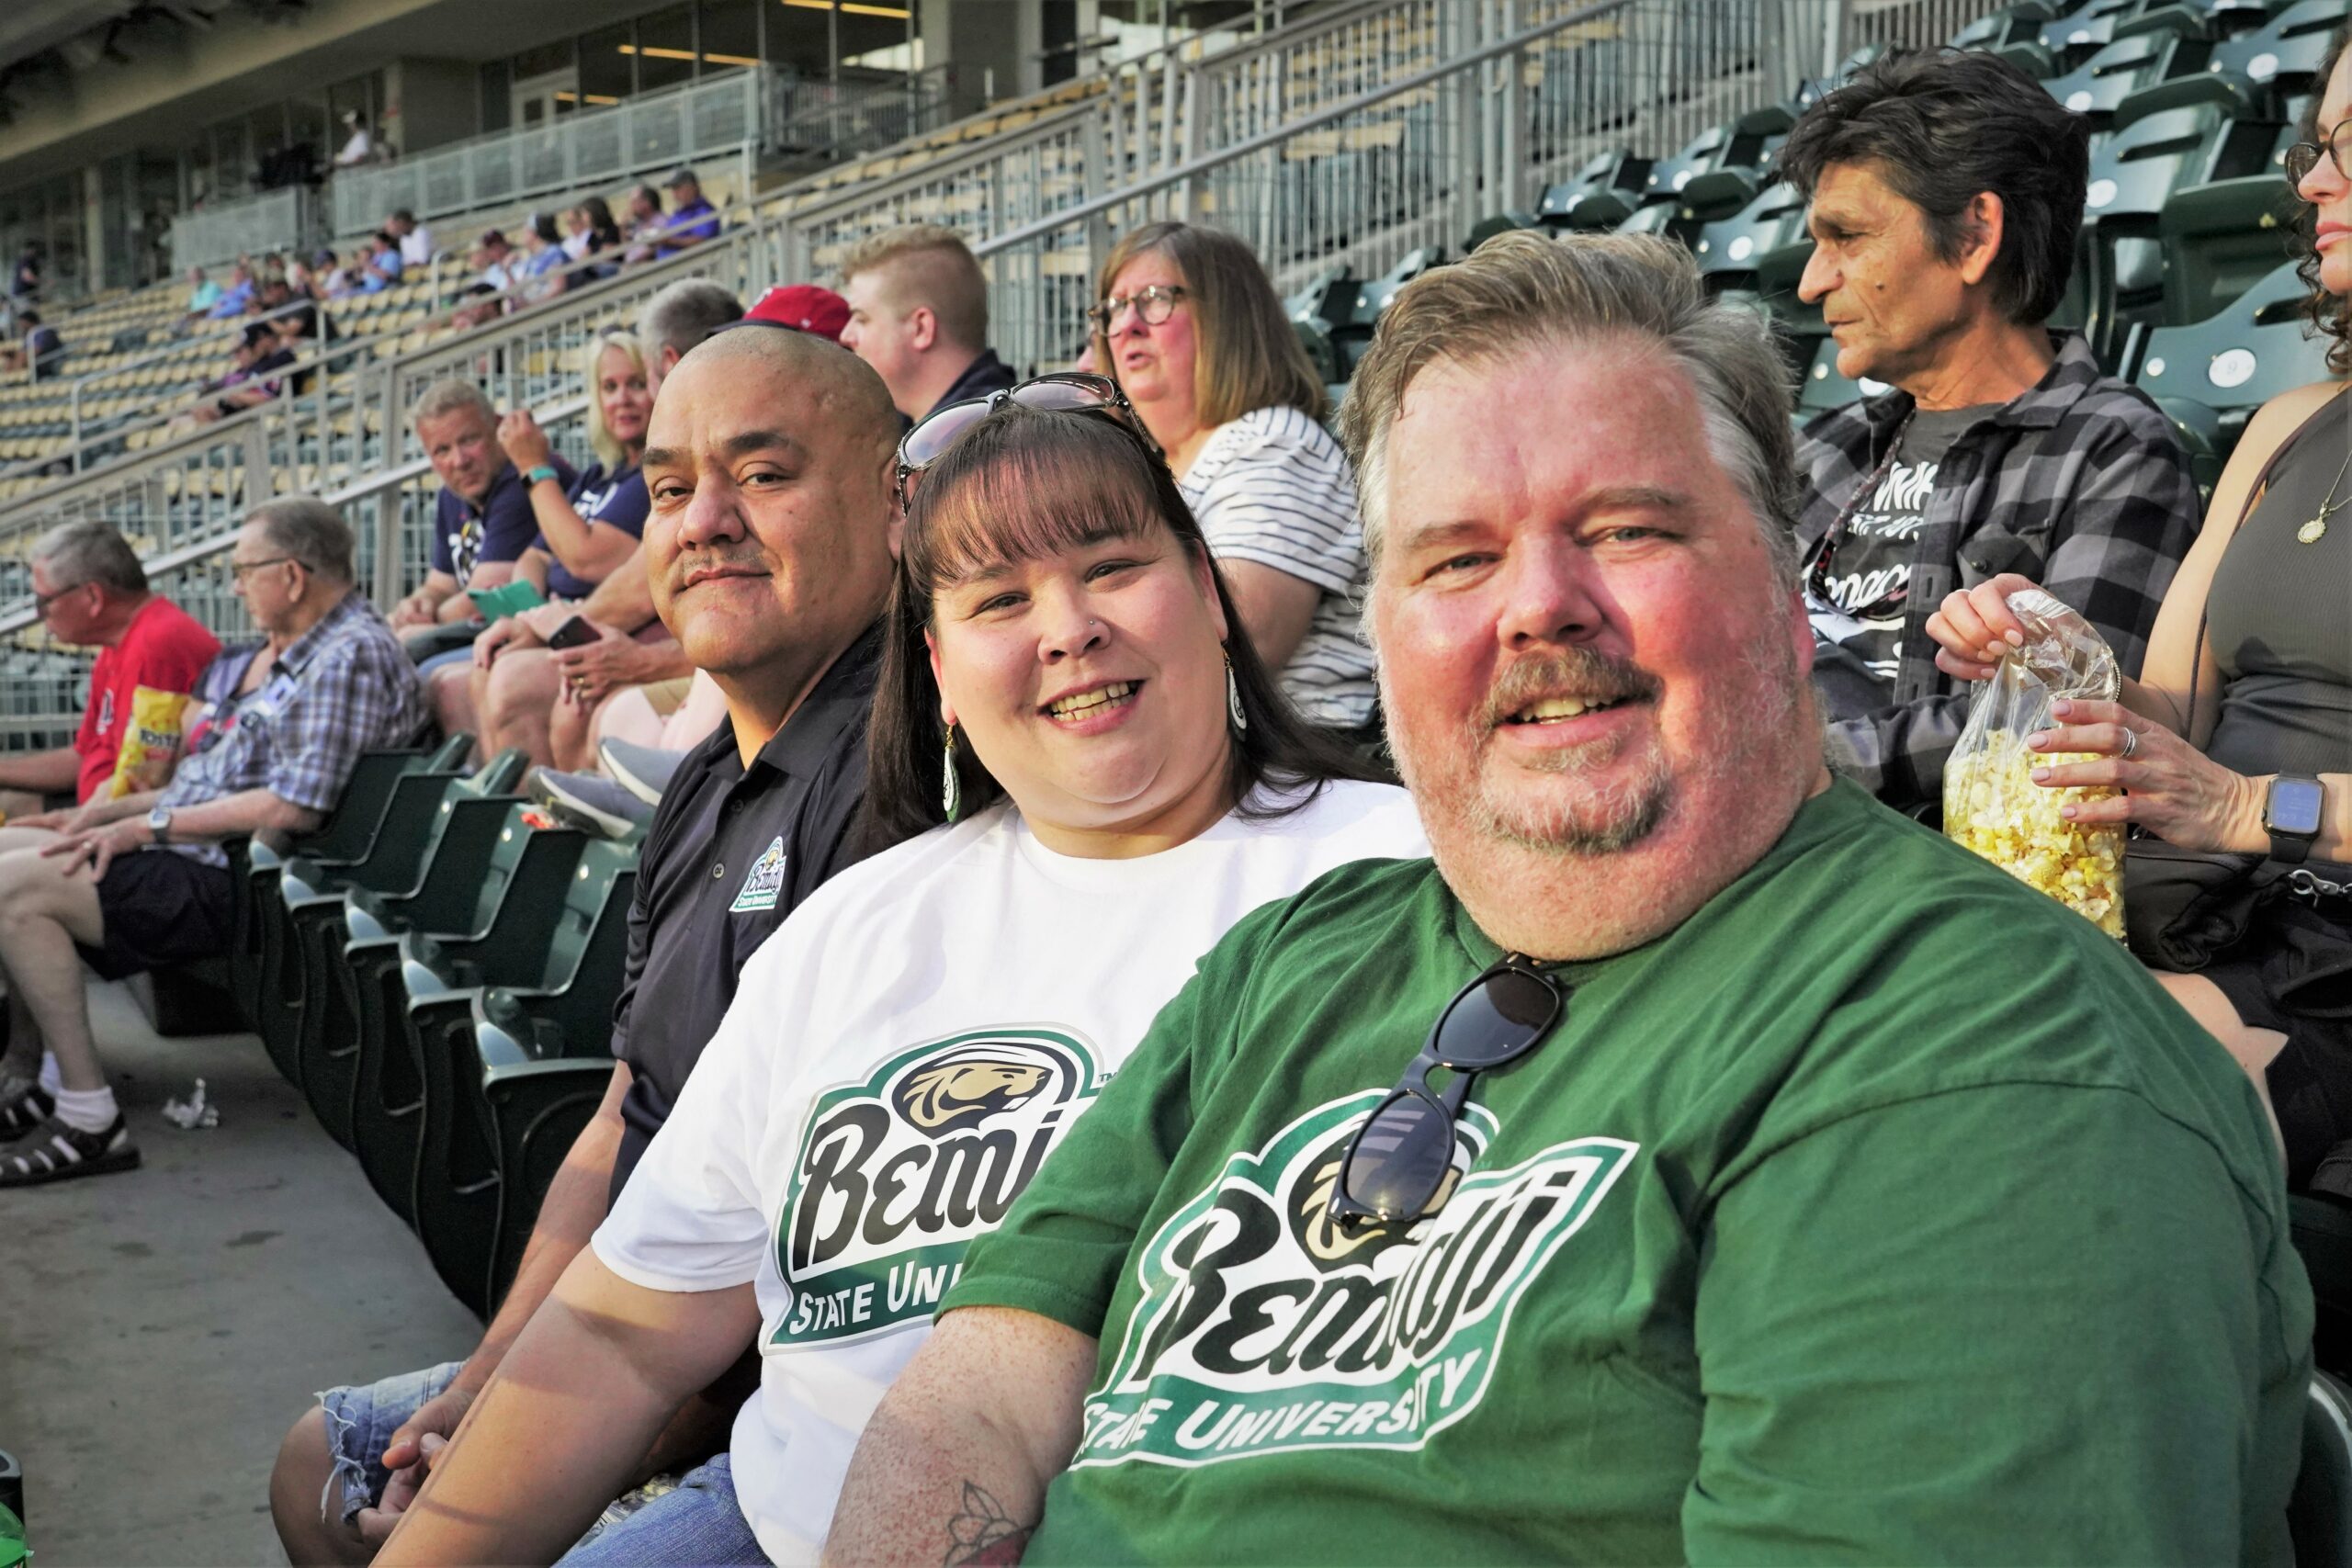 Lee Lussier Jr., left, Chrissy Downwind, center, and Travis Greene repped Bemidji State and cheered on the Twins for BSU Night at Target Field on Friday, Aug. 25, 2023, in Minneapolis. (Micah Friez / Bemidji State)